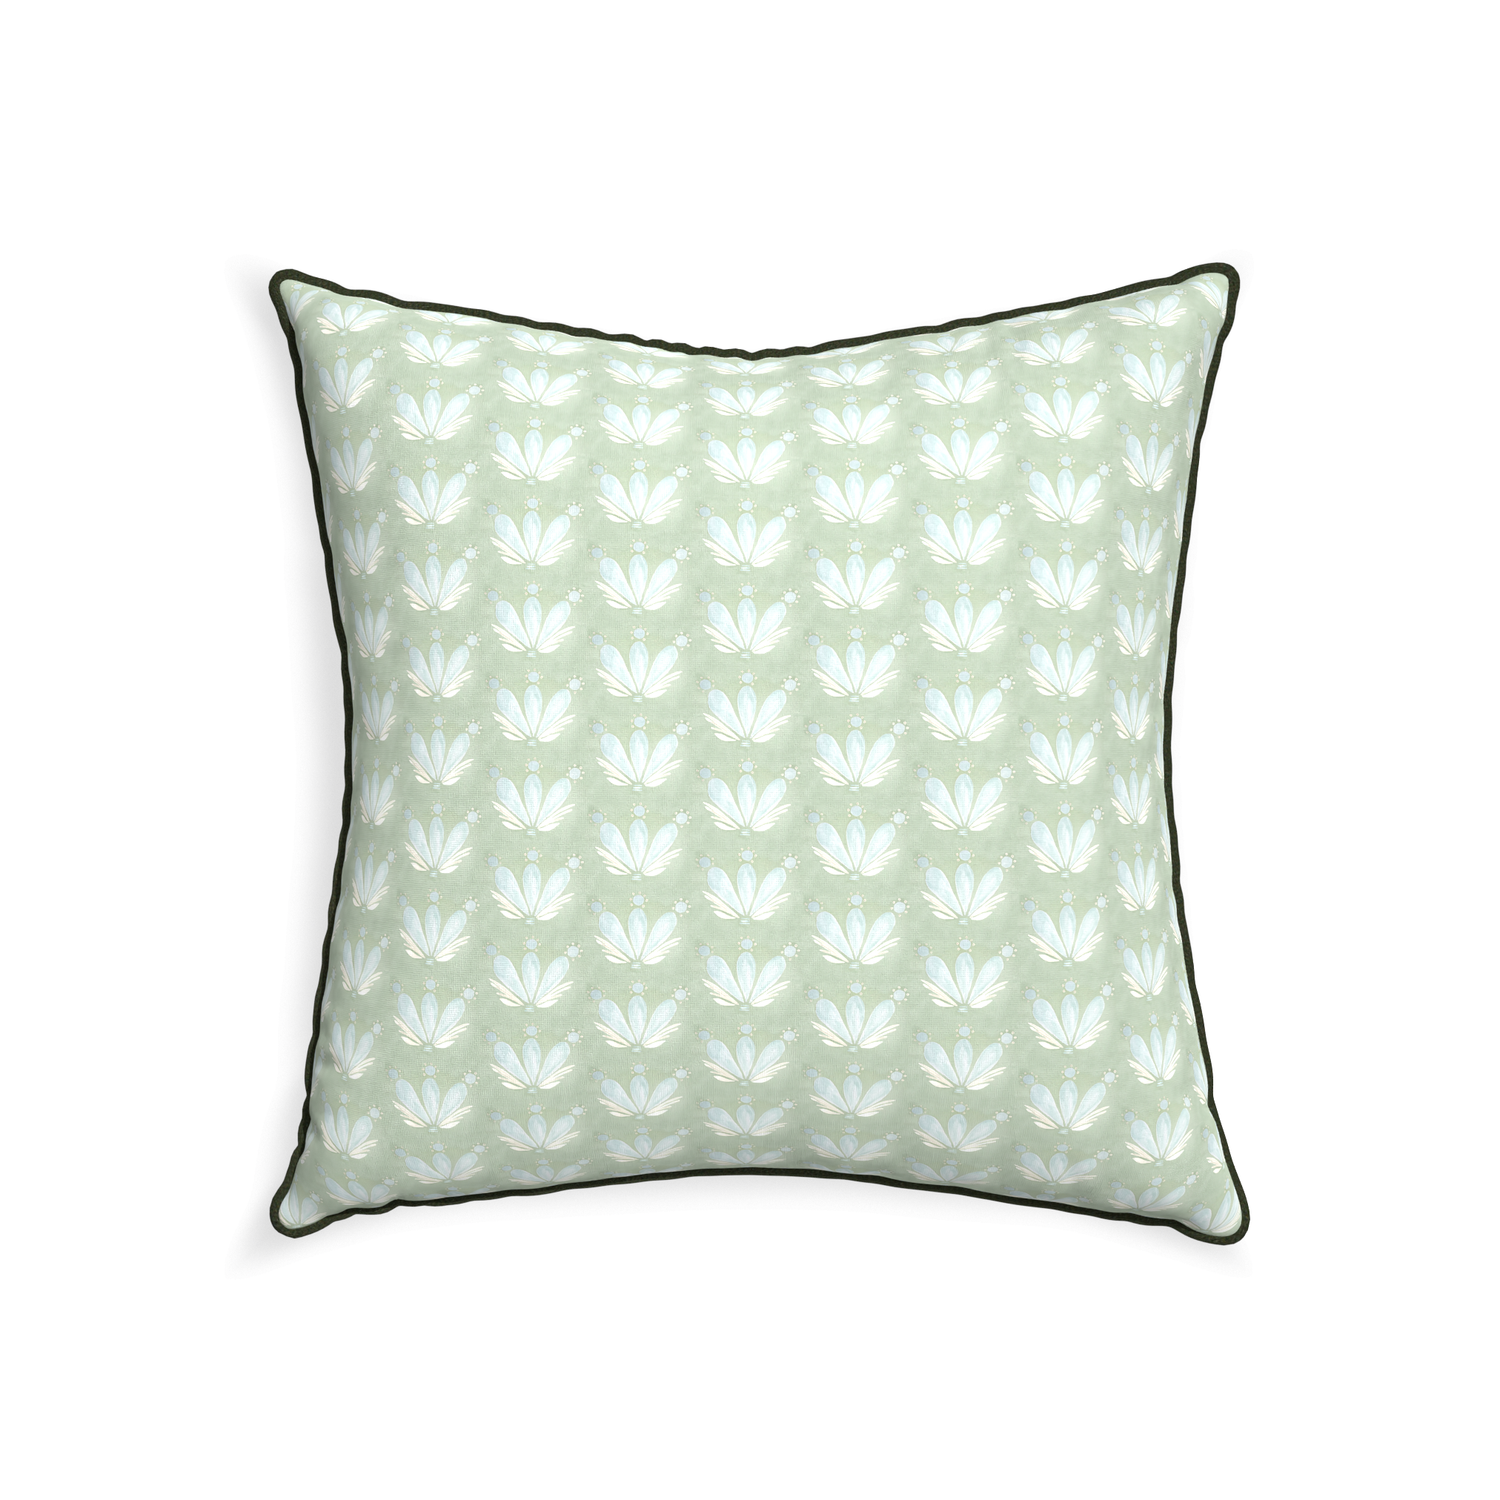 22-square serena sea salt custom blue & green floral drop repeatpillow with f piping on white background